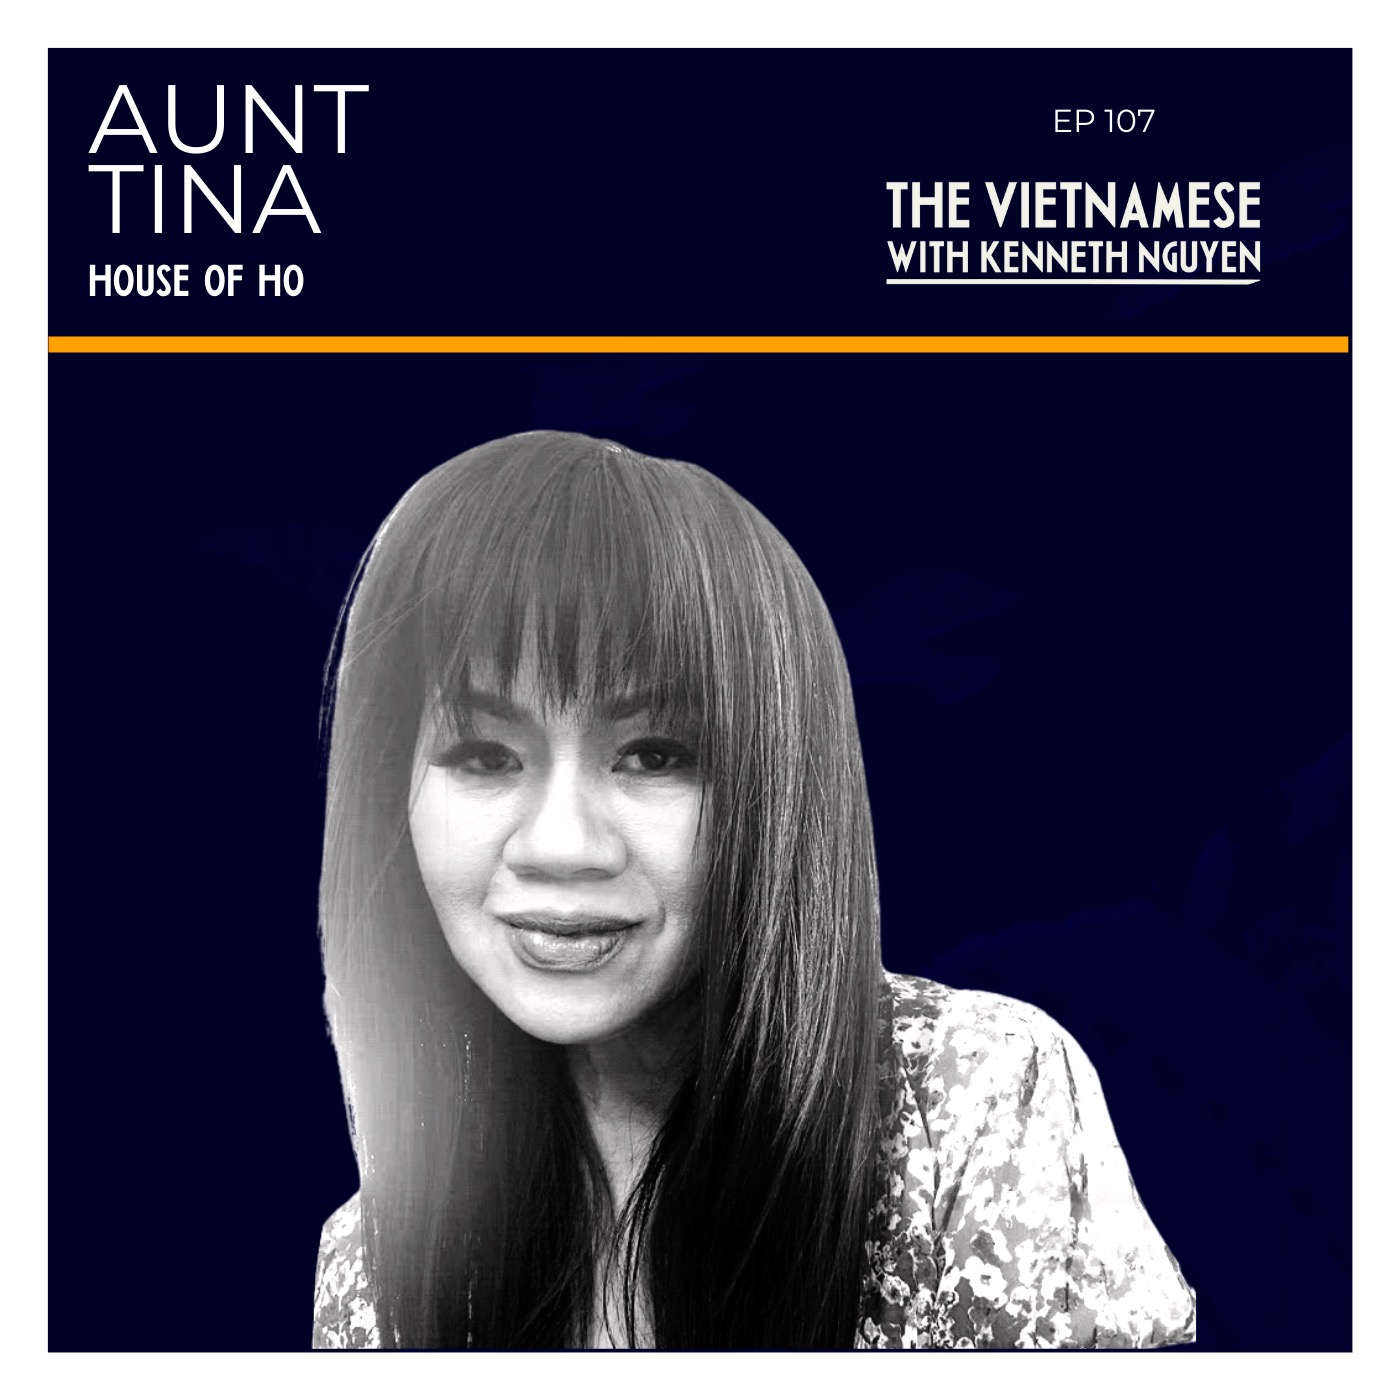 Ep. #107 Tieng Viet - Aunt Tina - House of Ho